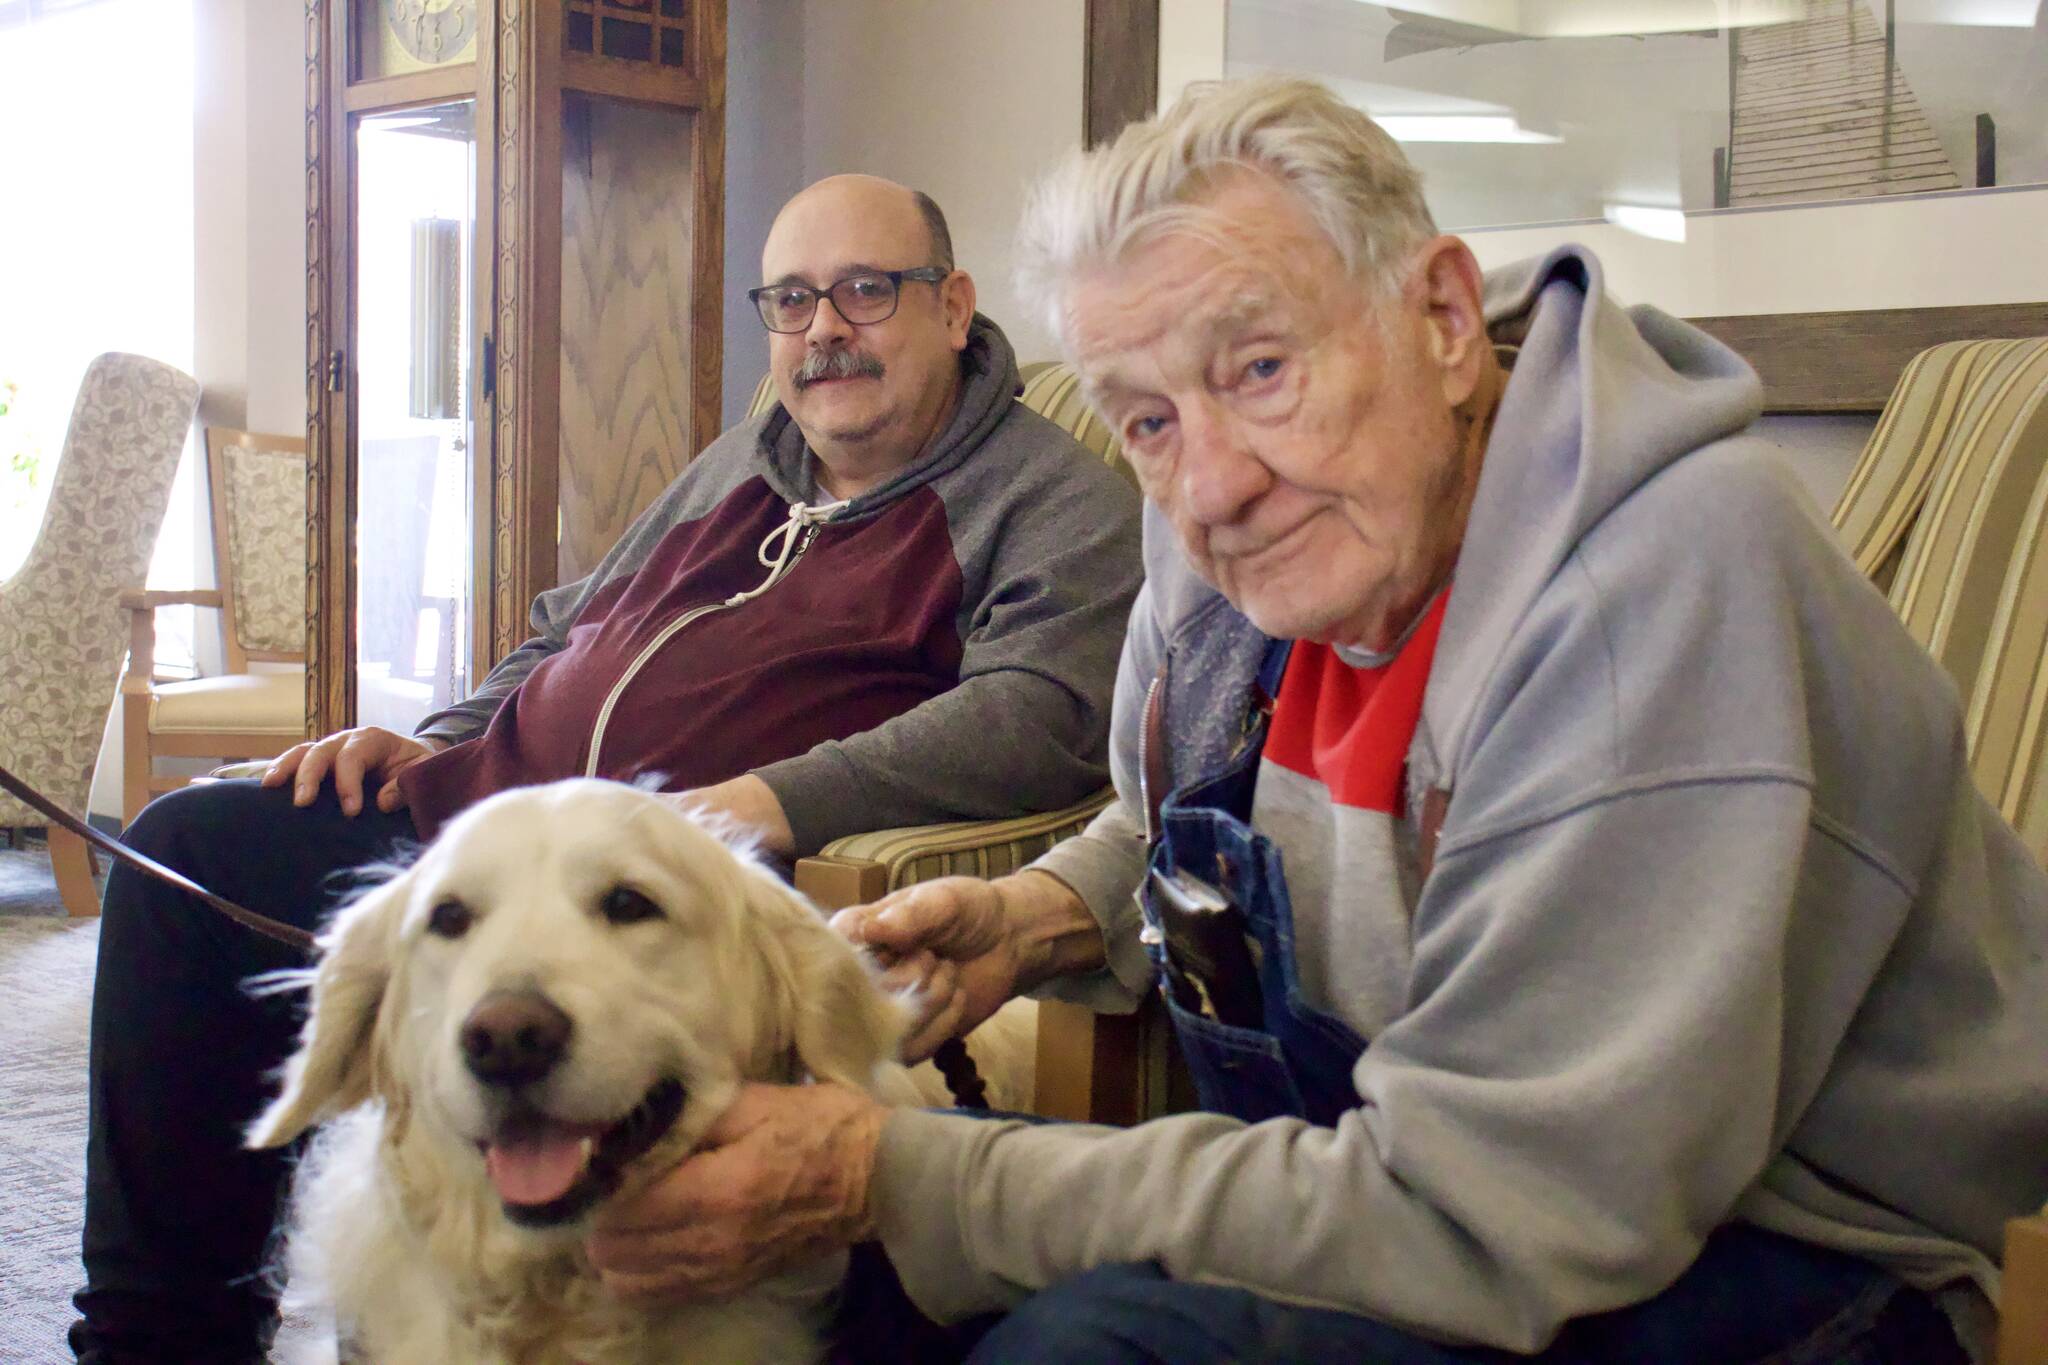 From left, Phill Neff and Gerald Henrich meet therapy dog Falkor.